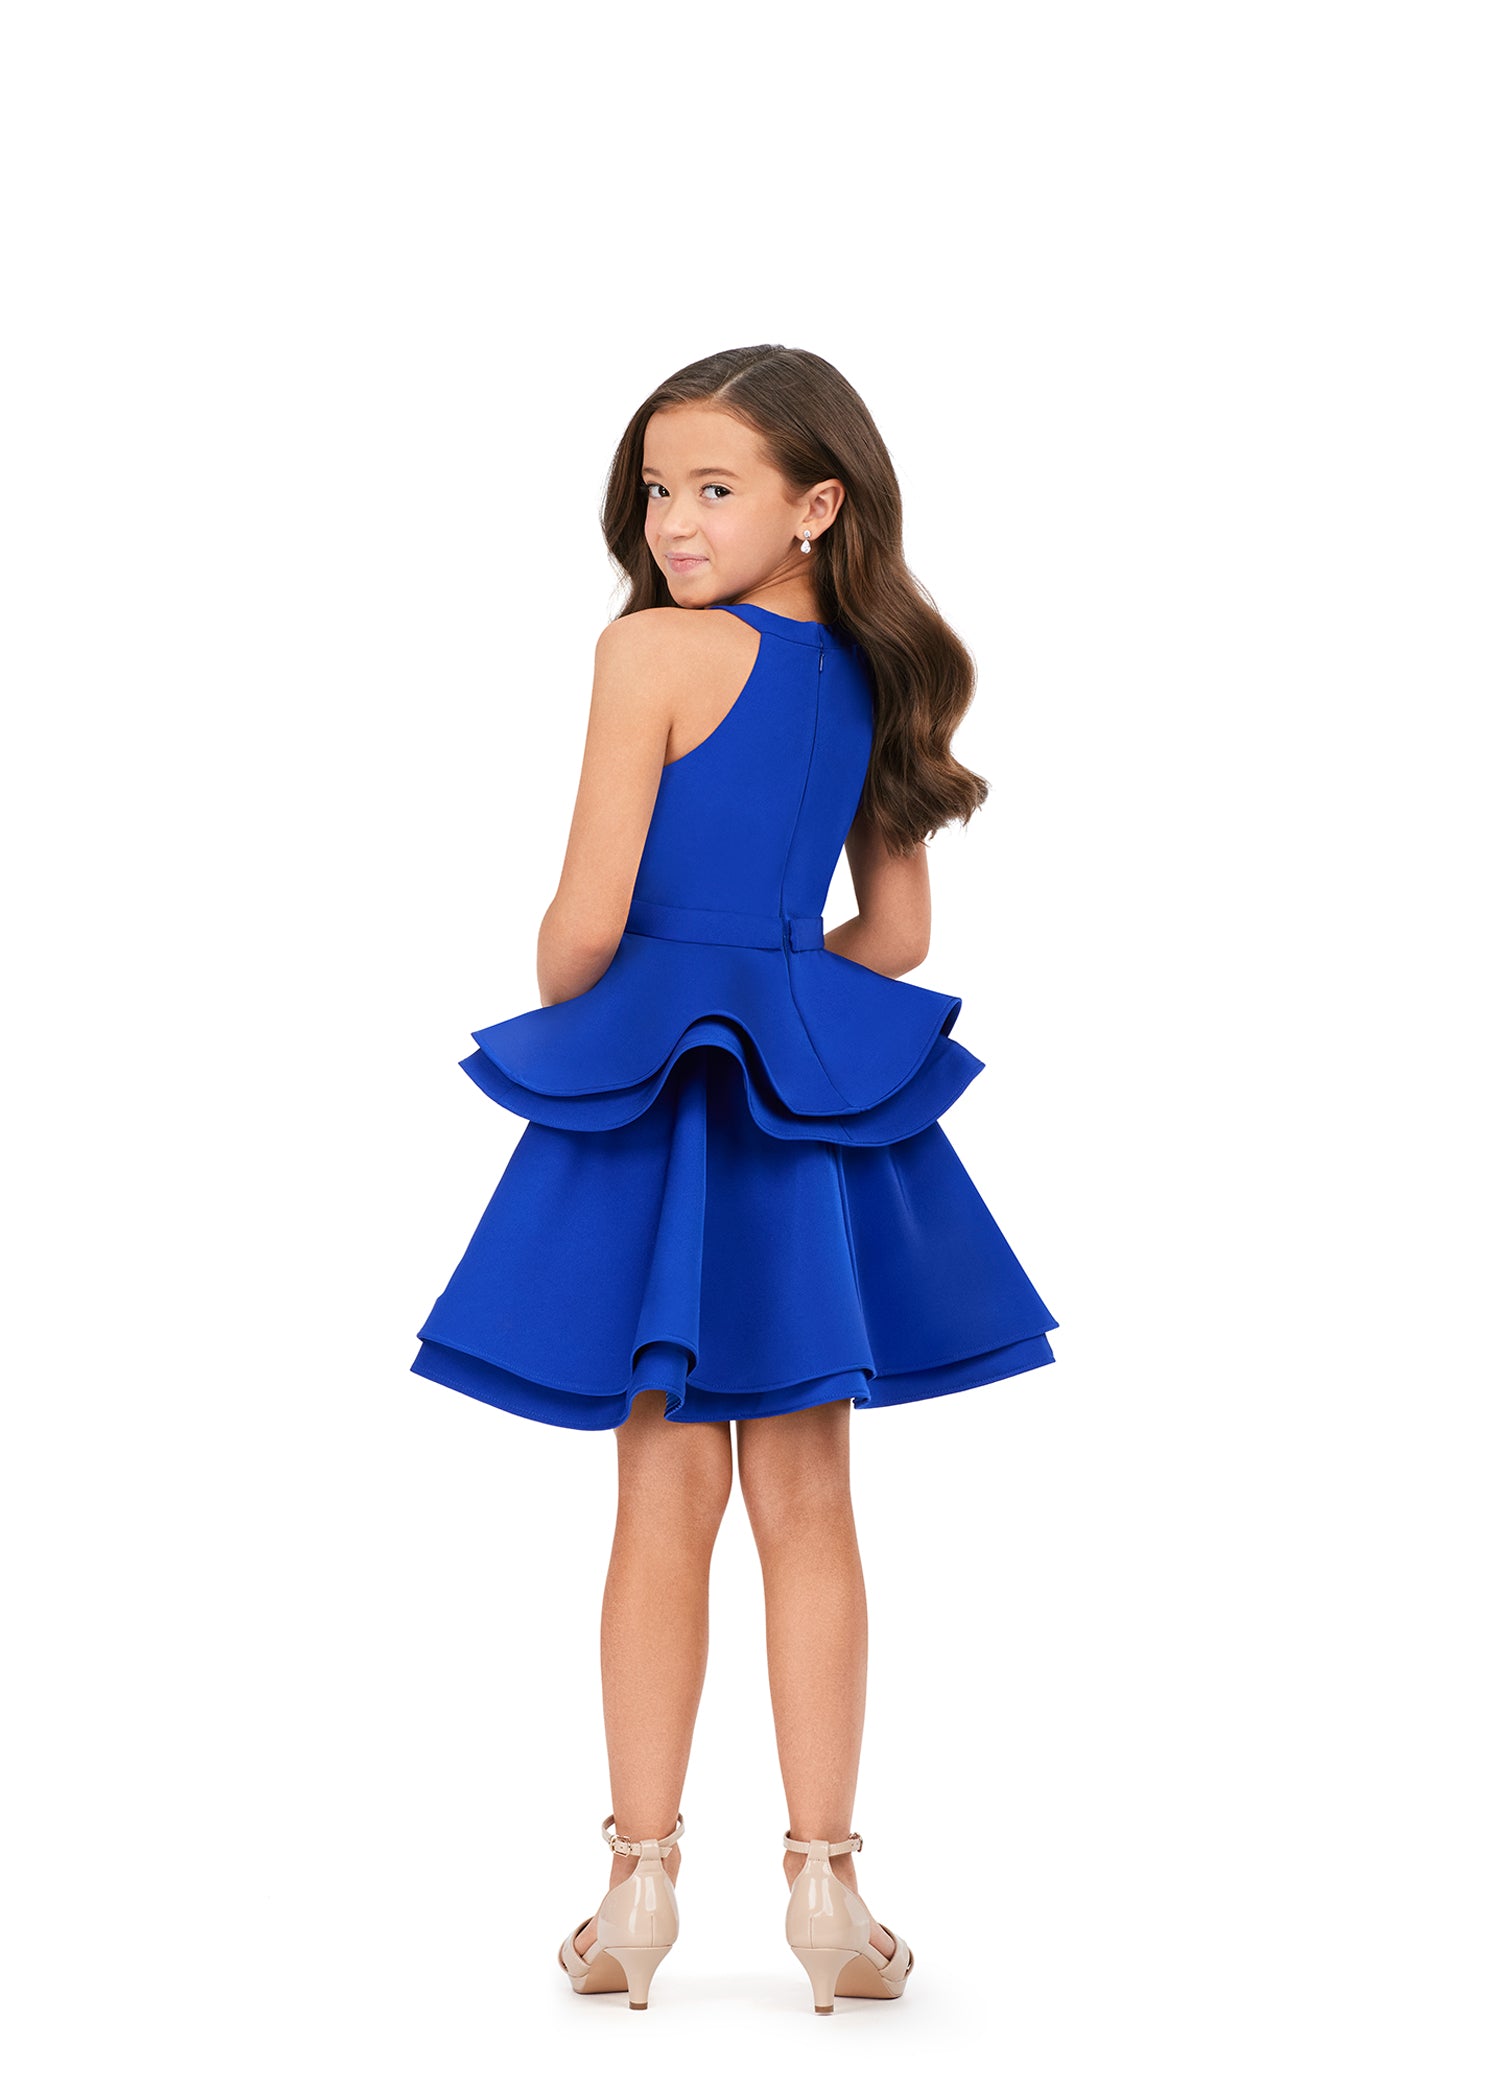 Ashley Lauren Kids 8221 A-Line Crew Neckline Ruffle Skirt Crepe Cocktail Dress. This cocktail dress is one of our favorites! The high neckline compliments the tiered, ruffle skirt and gives all the sass!